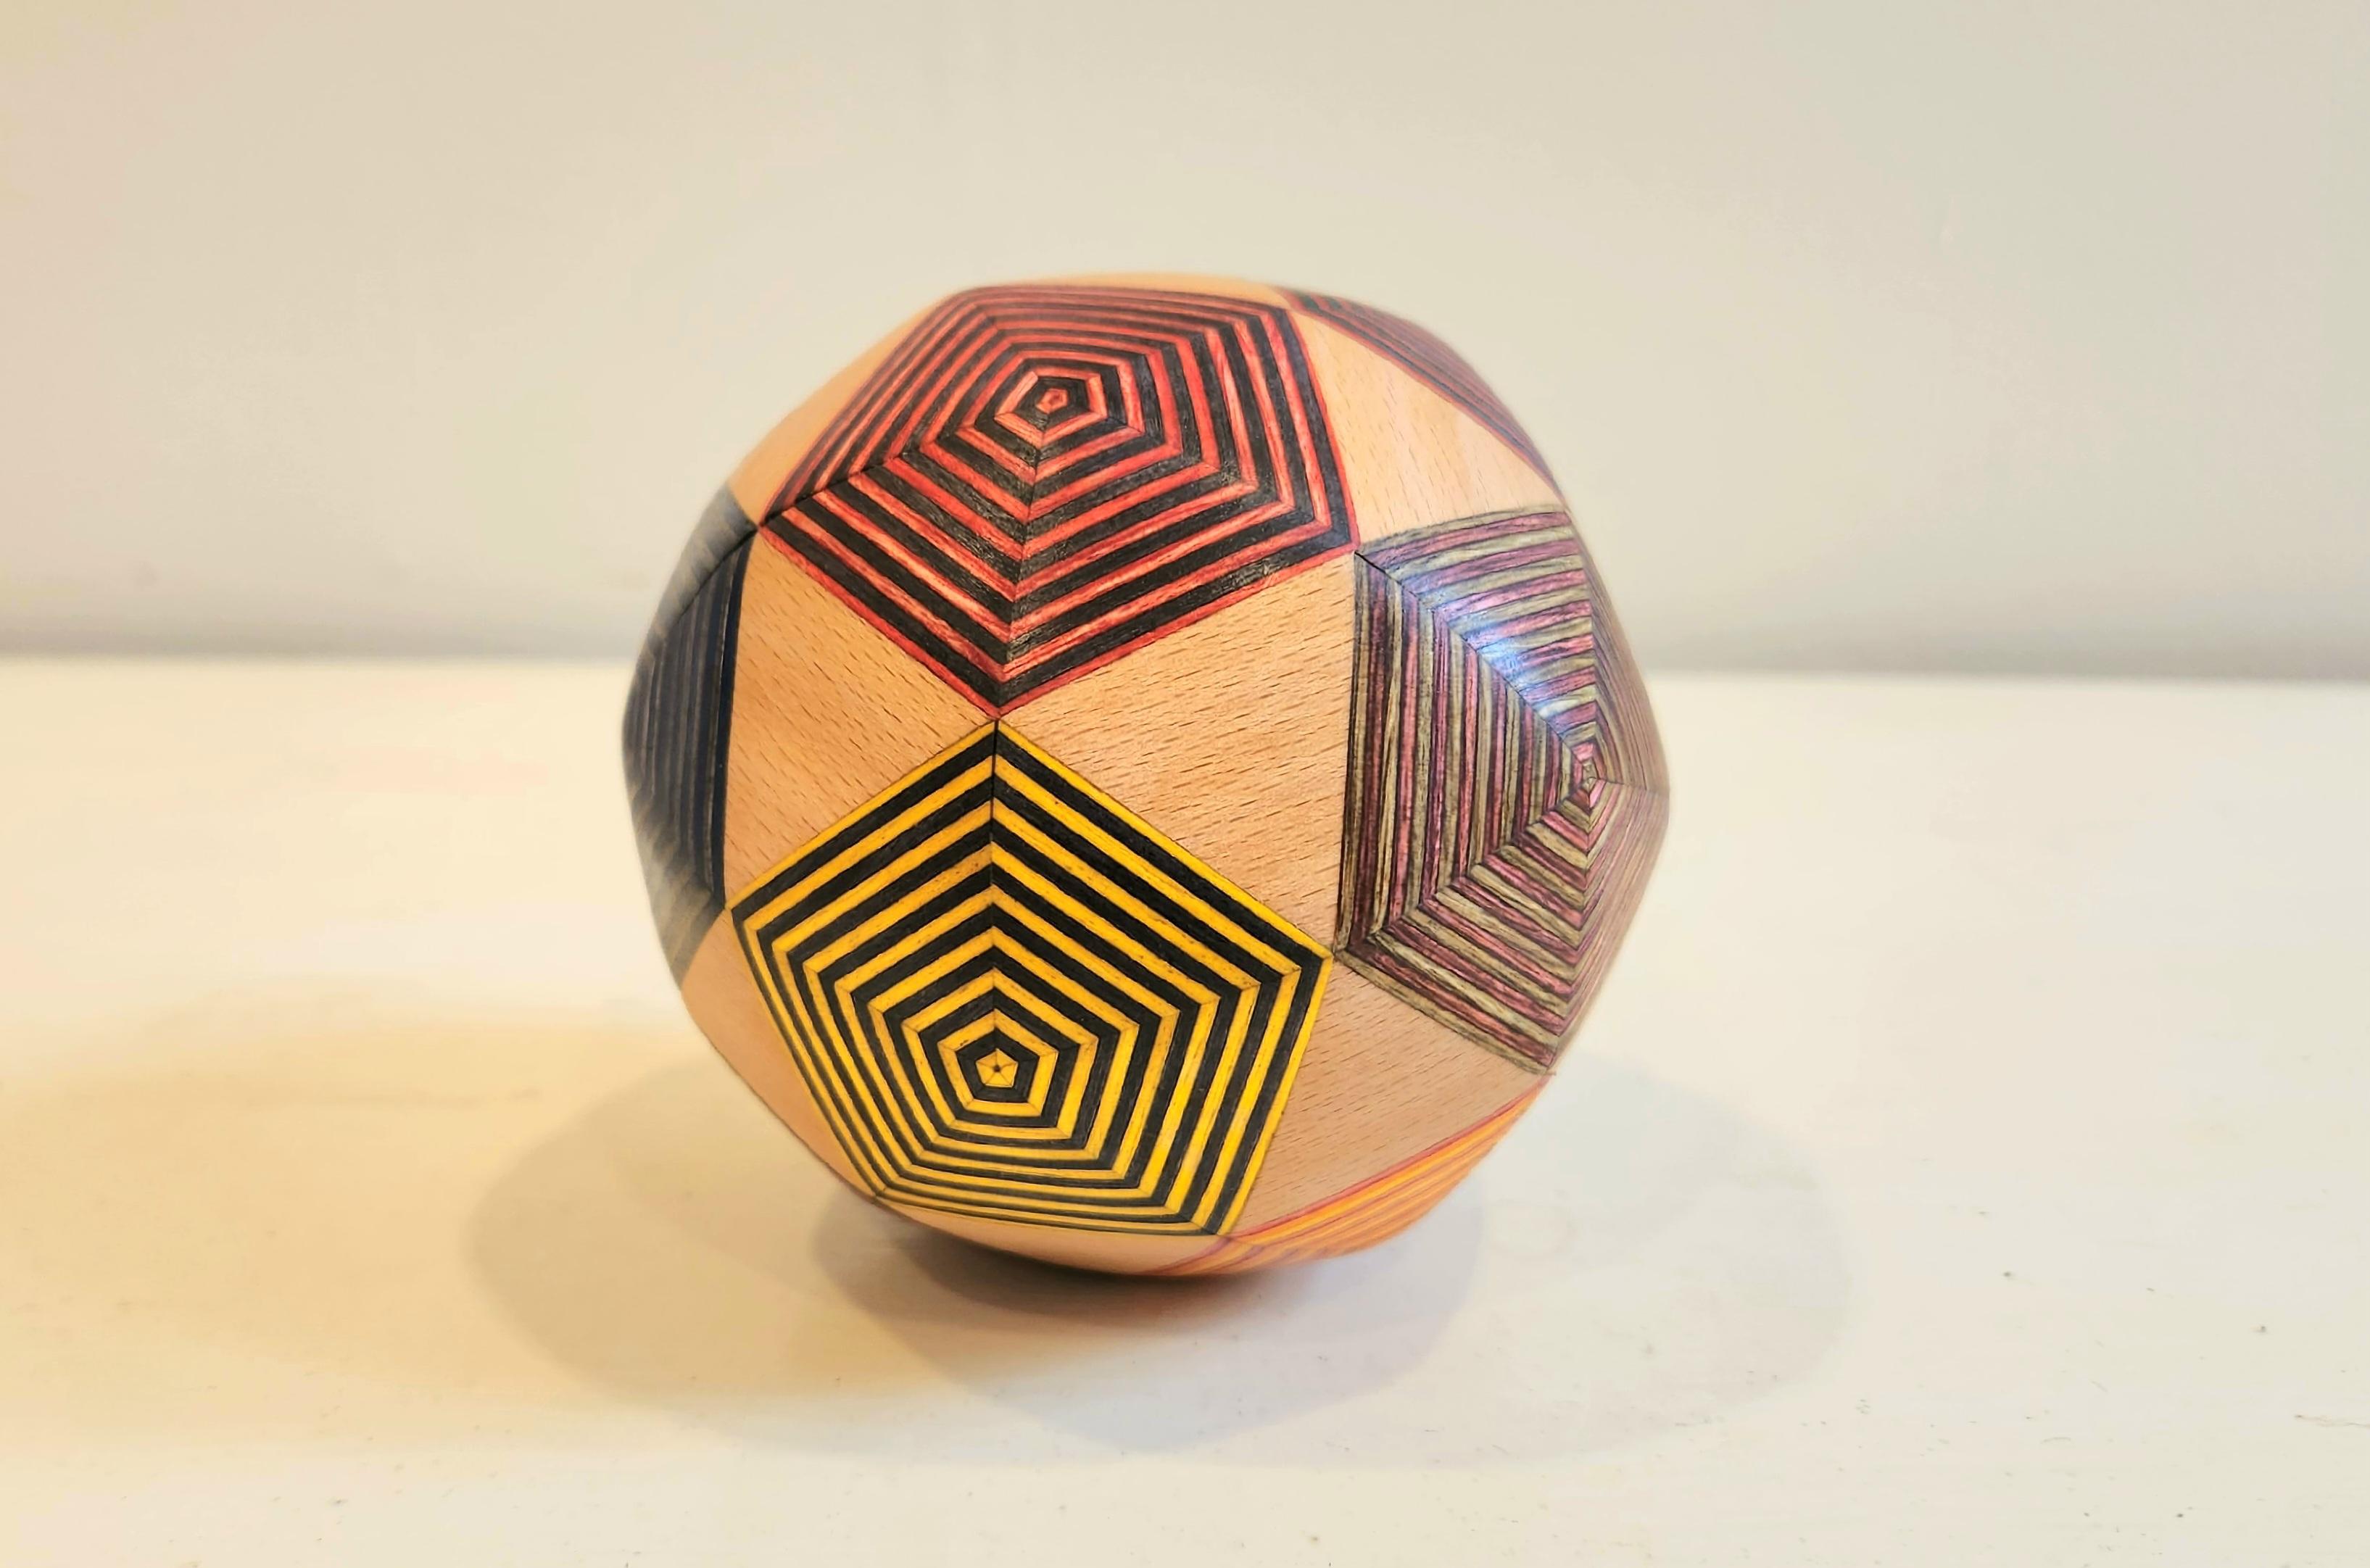 Sculpted Orb -- Icosahedron Frequency 2 - Sculpture by Abraham Ferraro